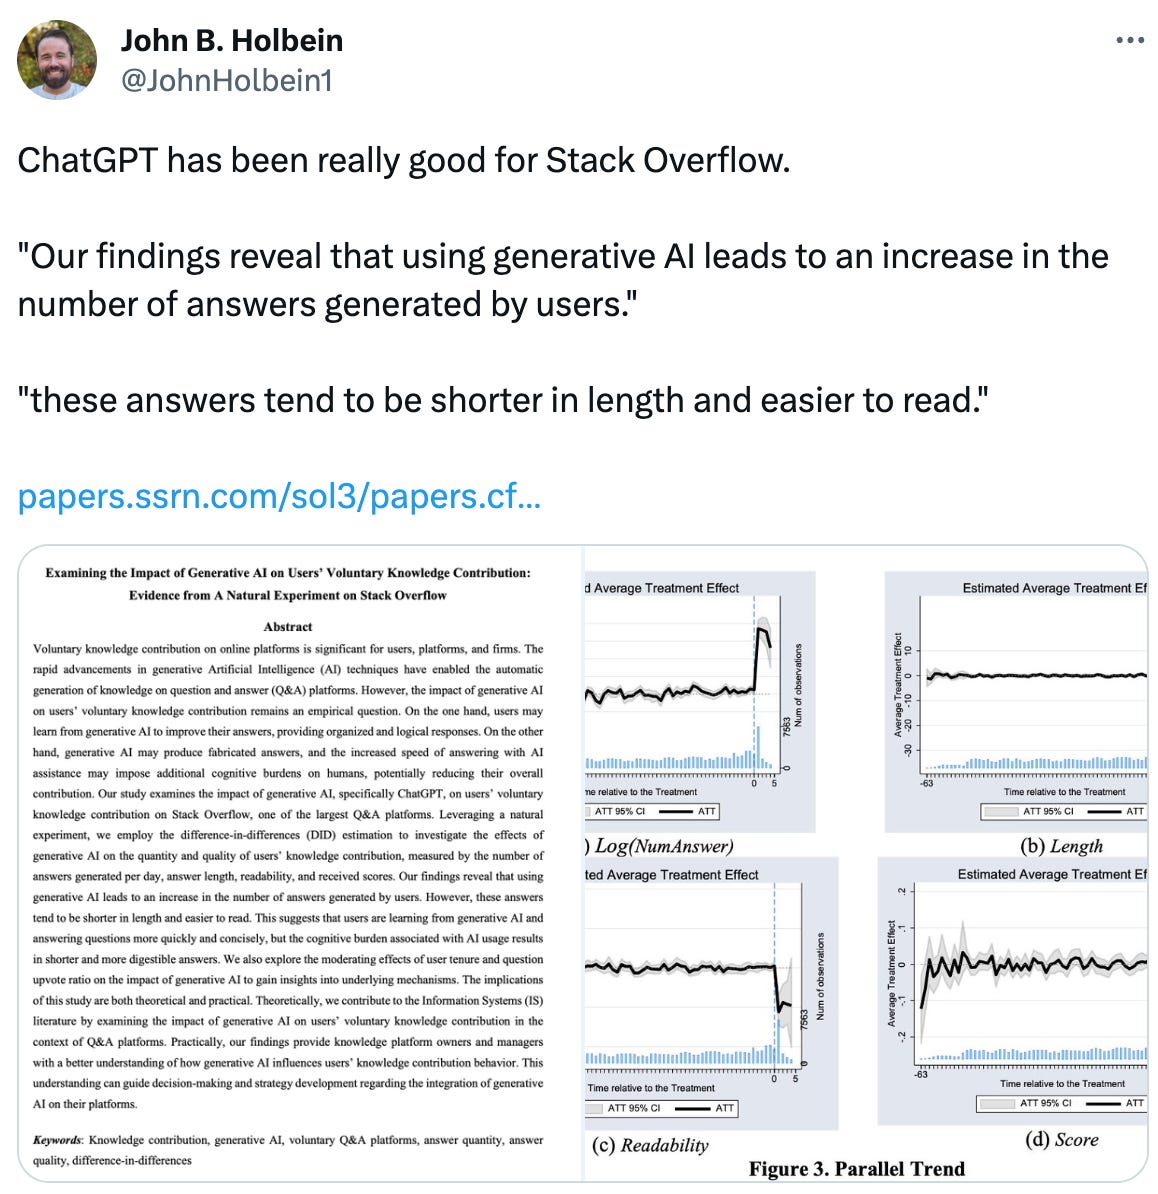  John B. Holbein @JohnHolbein1 ChatGPT has been really good for Stack Overflow.   "Our findings reveal that using generative AI leads to an increase in the number of answers generated by users."   "these answers tend to be shorter in length and easier to read."  https://papers.ssrn.com/sol3/papers.cfm?abstract_id=4462976